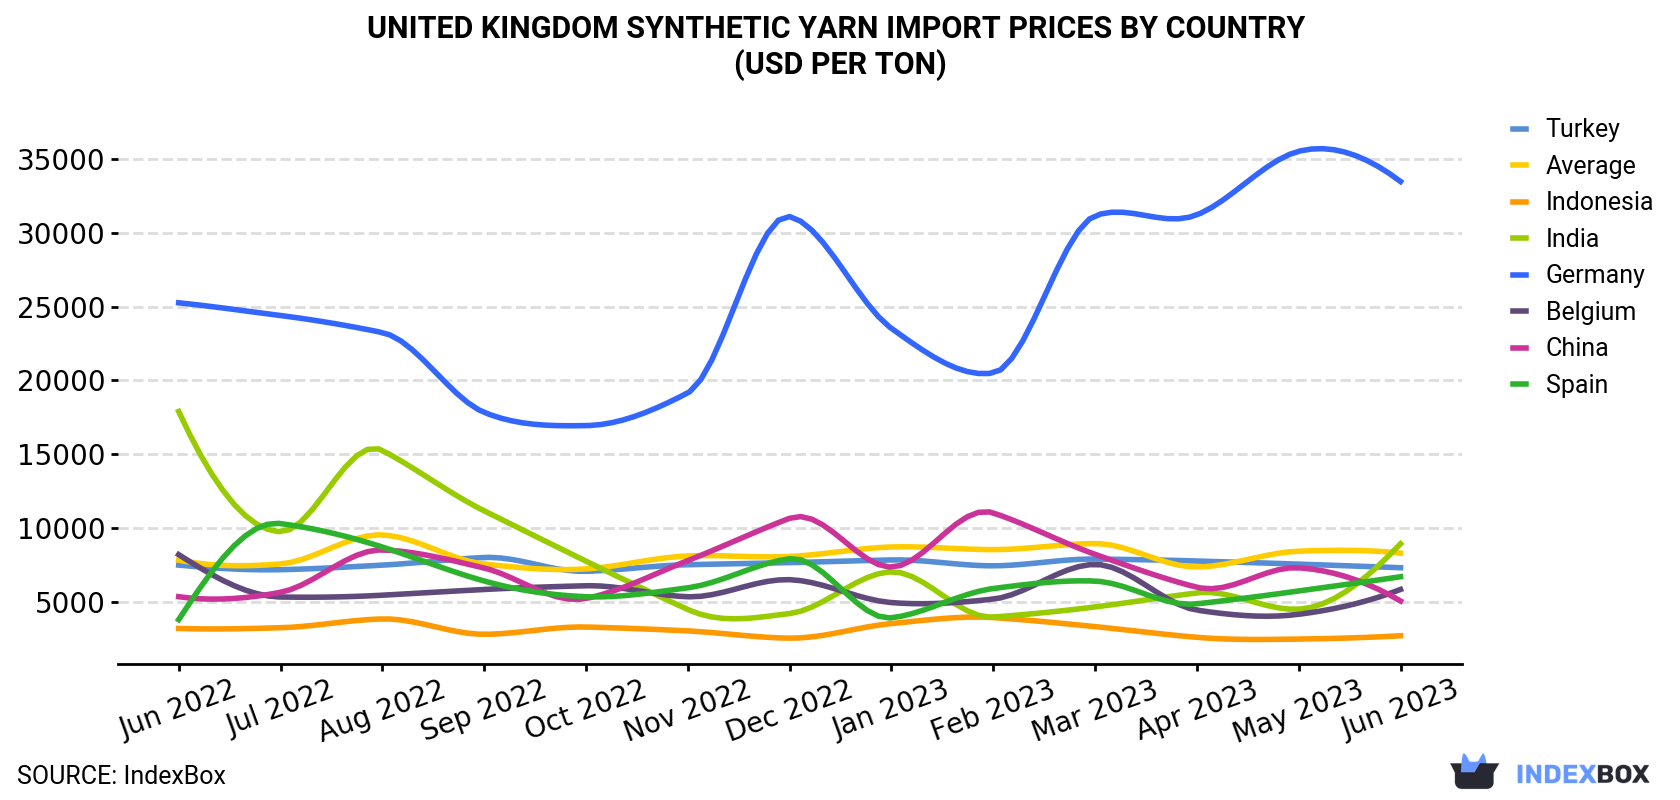 United Kingdom Synthetic Yarn Import Prices By Country (USD Per Ton)